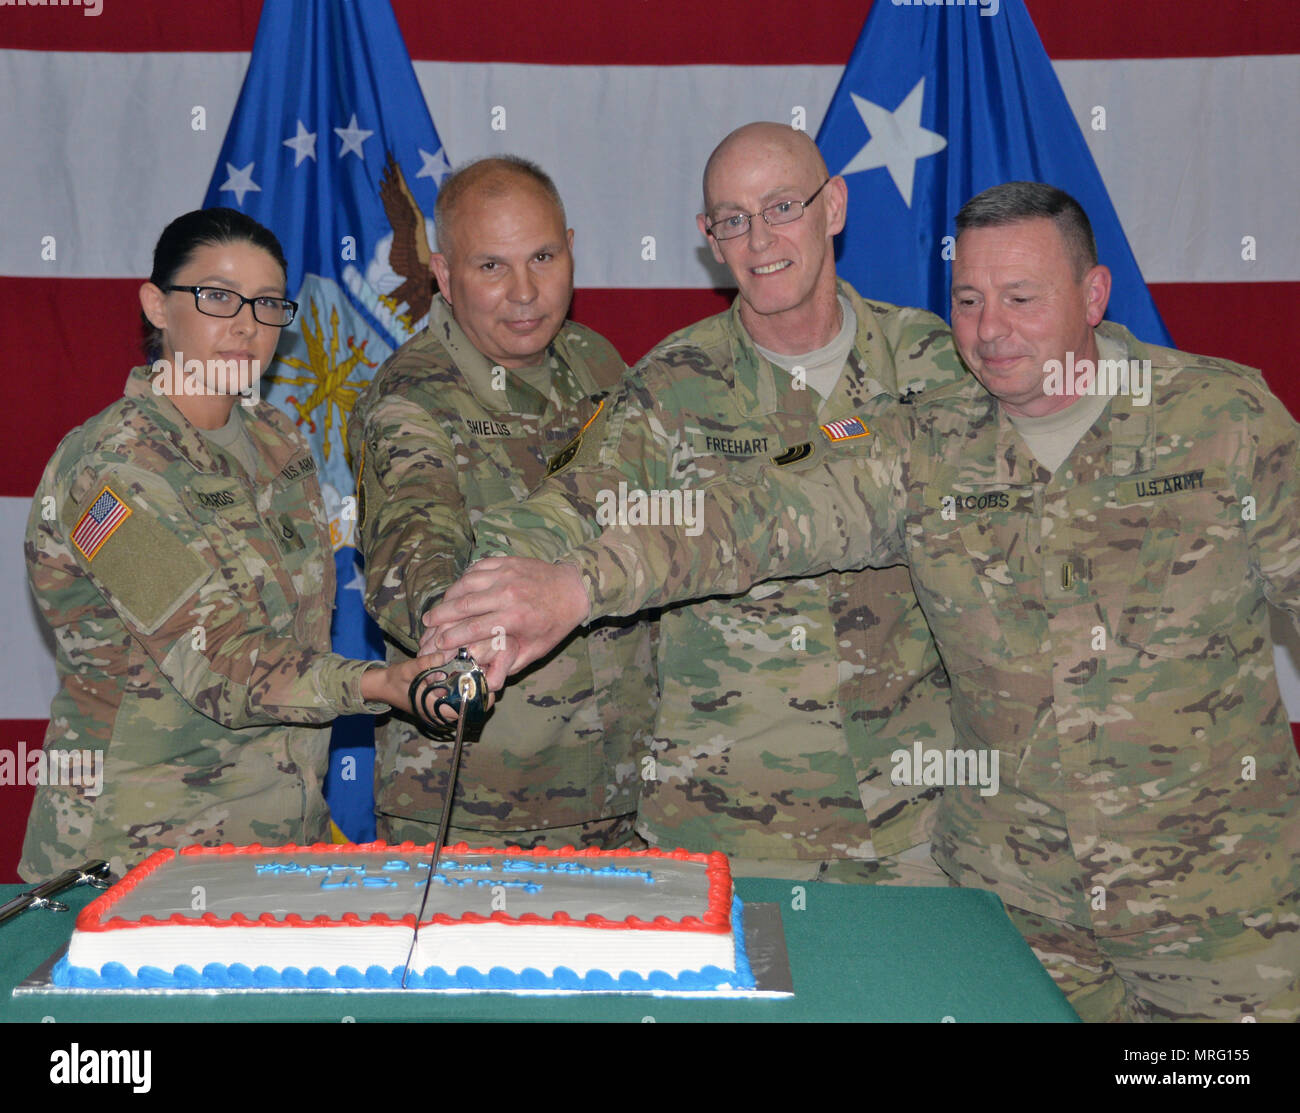 Youngest and oldest Soldiers present cut the birthday cake during Army Birthday ceremonies at New York National Guard Headquarters in Latham, N.Y. on June 17, 2017. Cutting the cake are, from left, PFC Jade Richards, the youngest Solldier, Brig. Gen. Raymond Shields, commander of the New York Army National Guard, Col. James Freehart, the oldest Soldier present, and Chief Warrant Officer 5 Gordon Jacobs, another Army veteran.New York Army National Guard members celebrated the 242nd Birthday of the United States Army. (U.S. Army National Guard photo by: Sgt. Major Corine Lombardo) Stock Photo